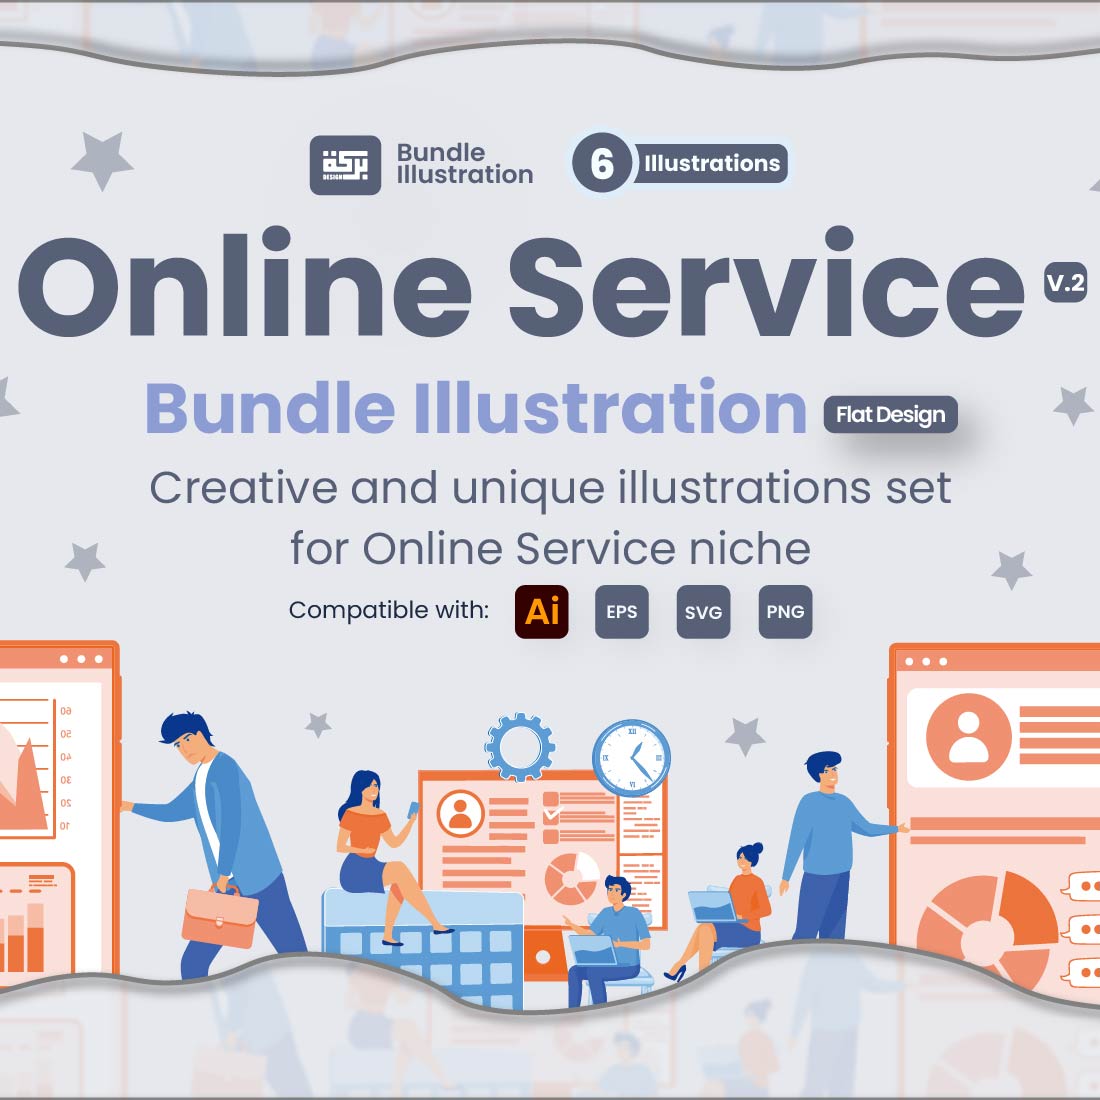 6 Illustrations Related to Online Service 2 cover image.